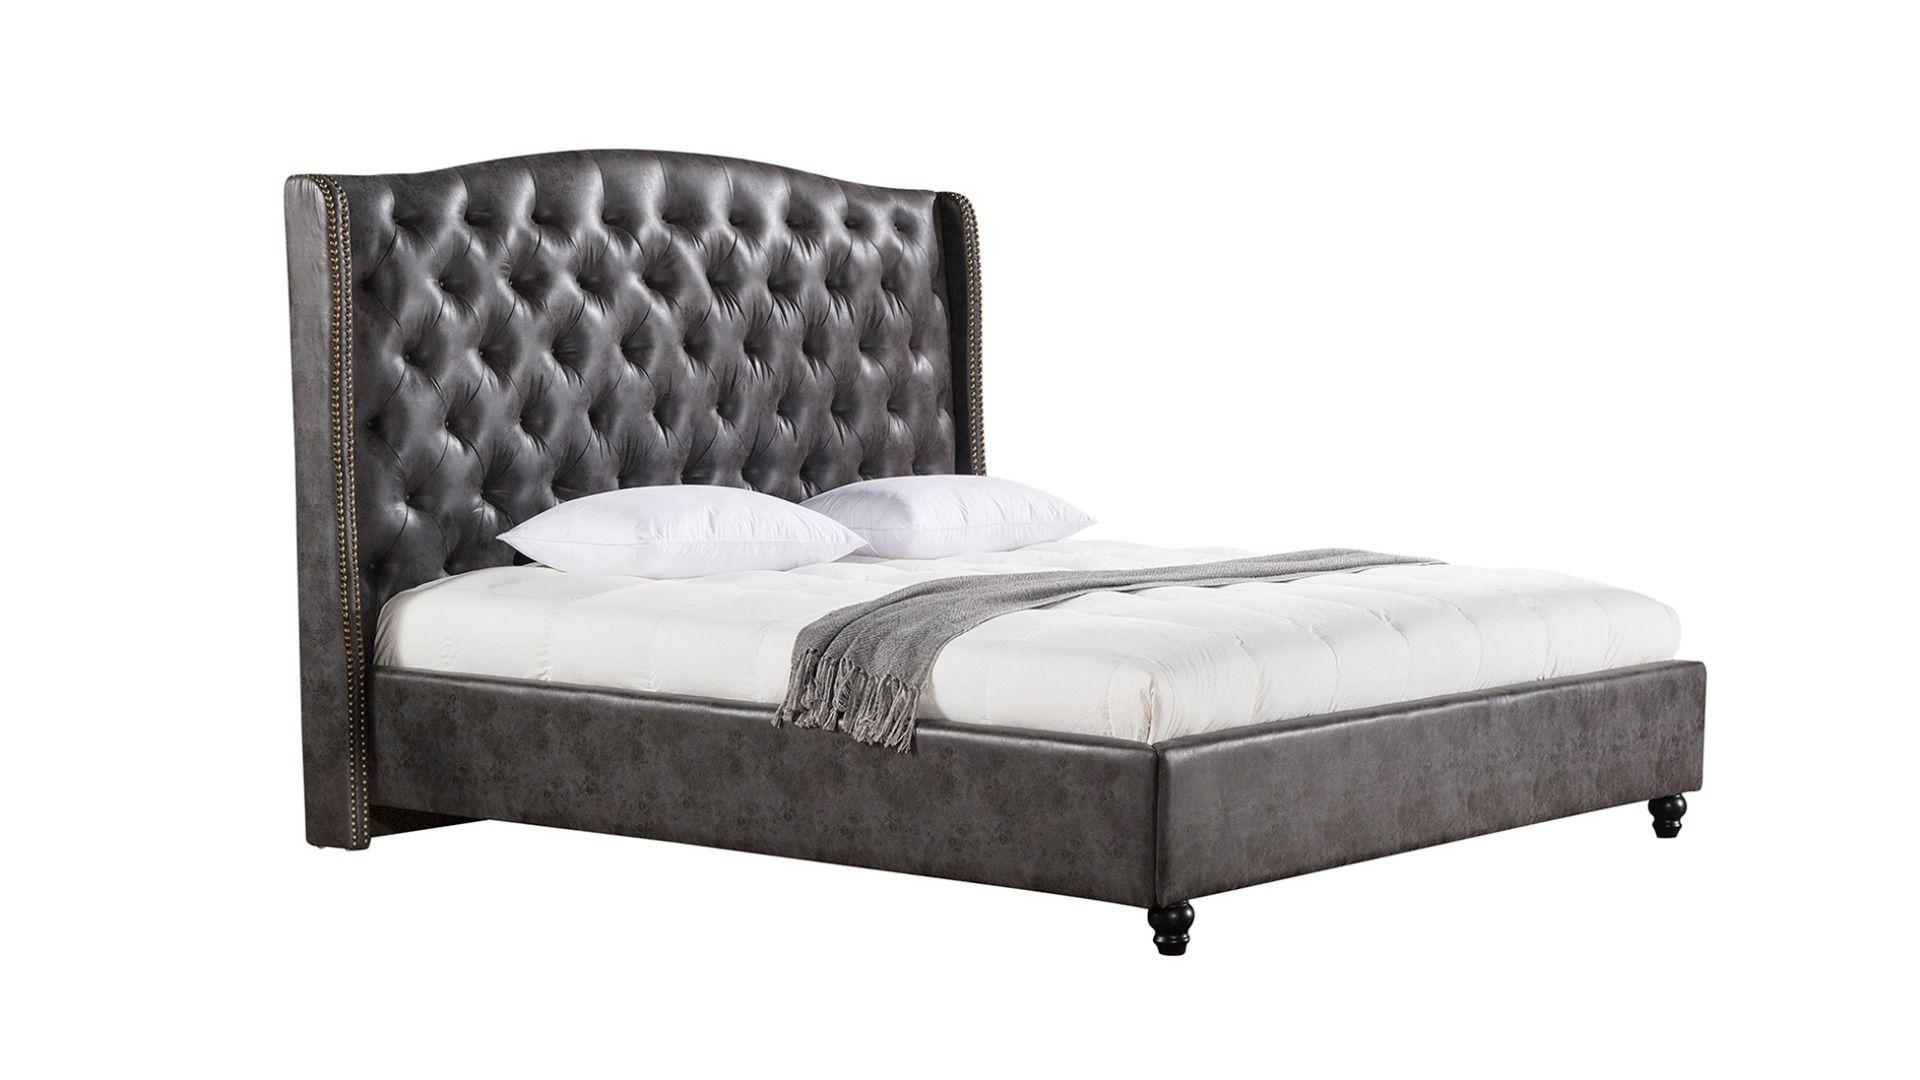 

    
Dark Gray Cal King Size Bed Leather Fabric Tufted Headboard American Eagle BD062-DG
